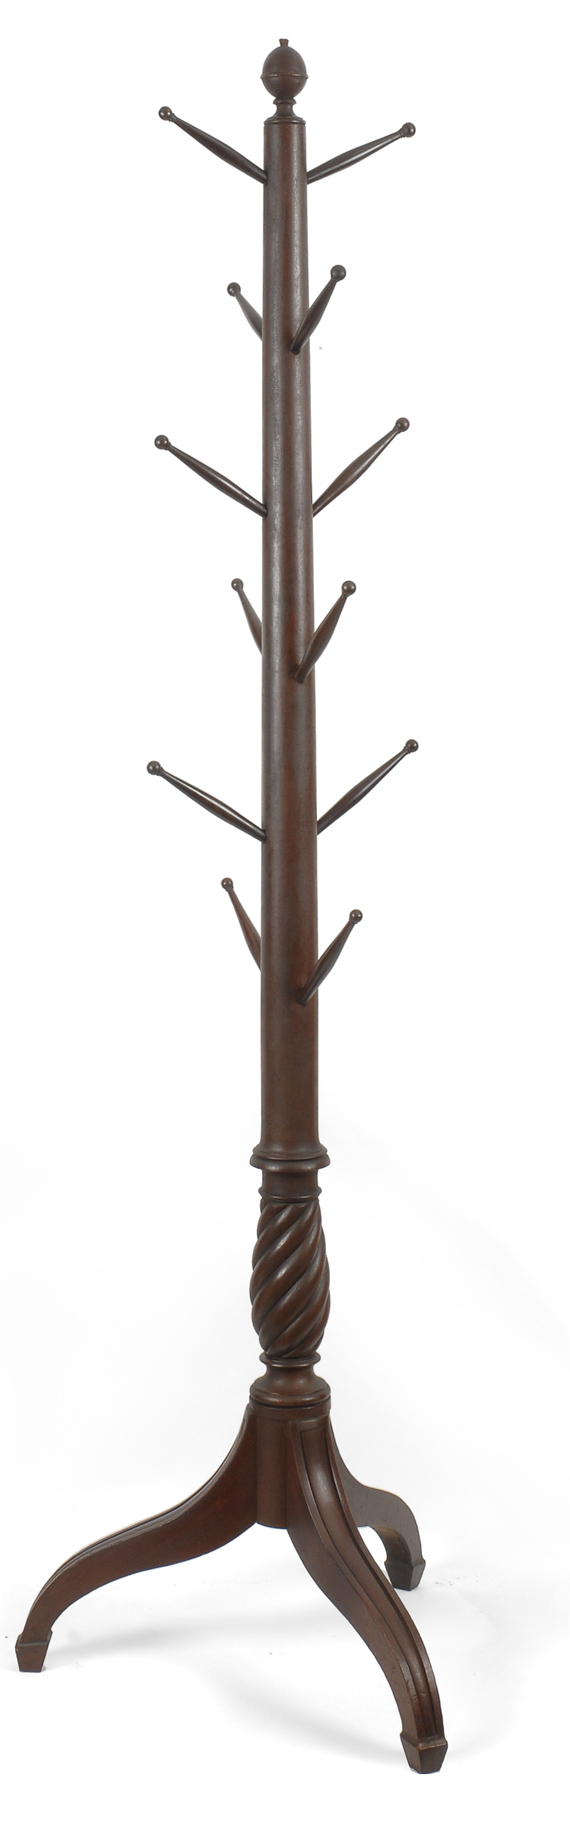 An Extremely Rare Sheraton Turned Mahogany Retailer’s Hat Stand, circa 1820.